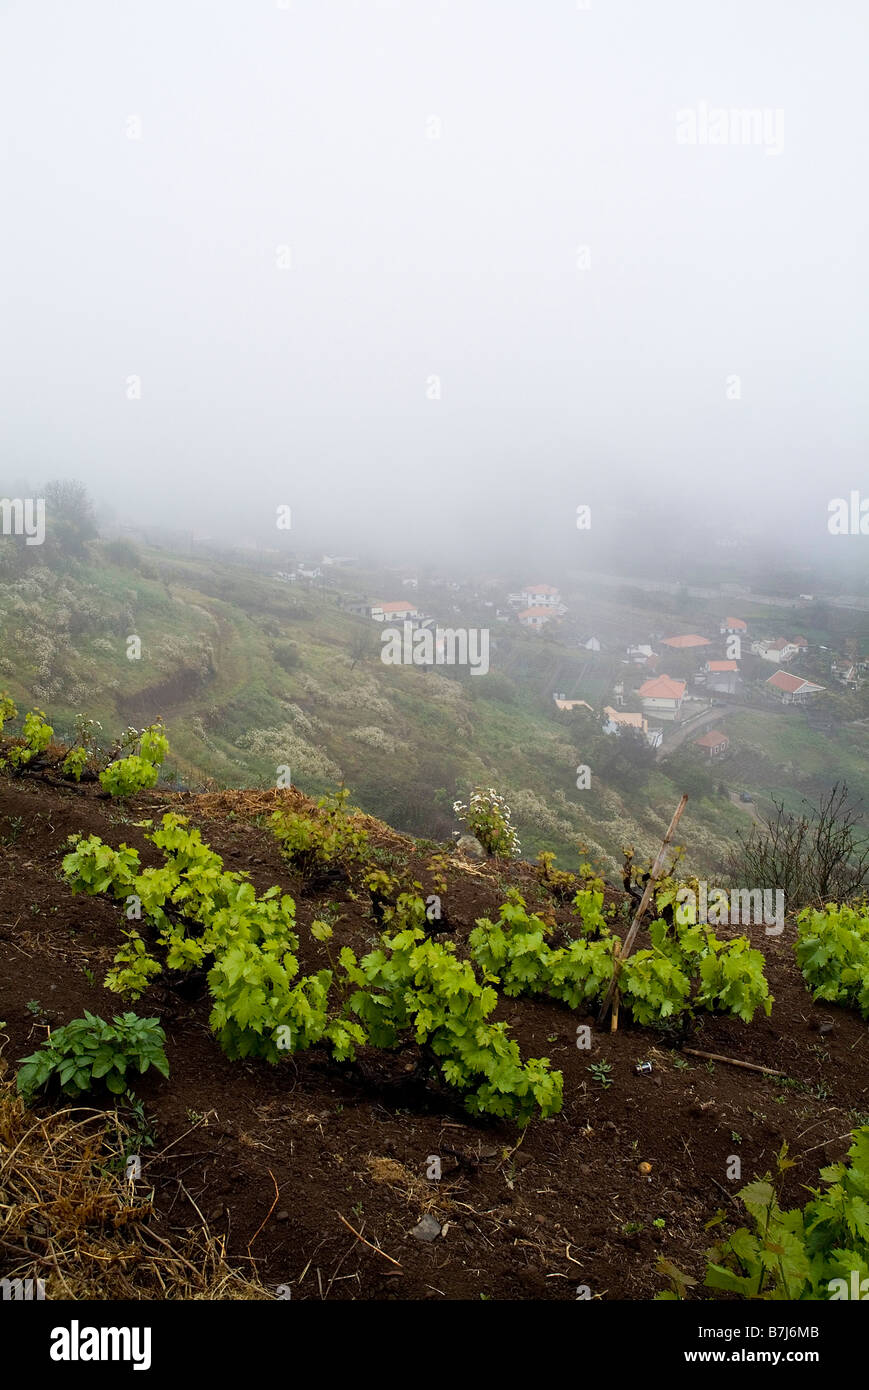 dh  LEVADA MADEIRA Grape vines growing in field misty hillside grapevines hill slope wine grapes vine vineyard fields Stock Photo